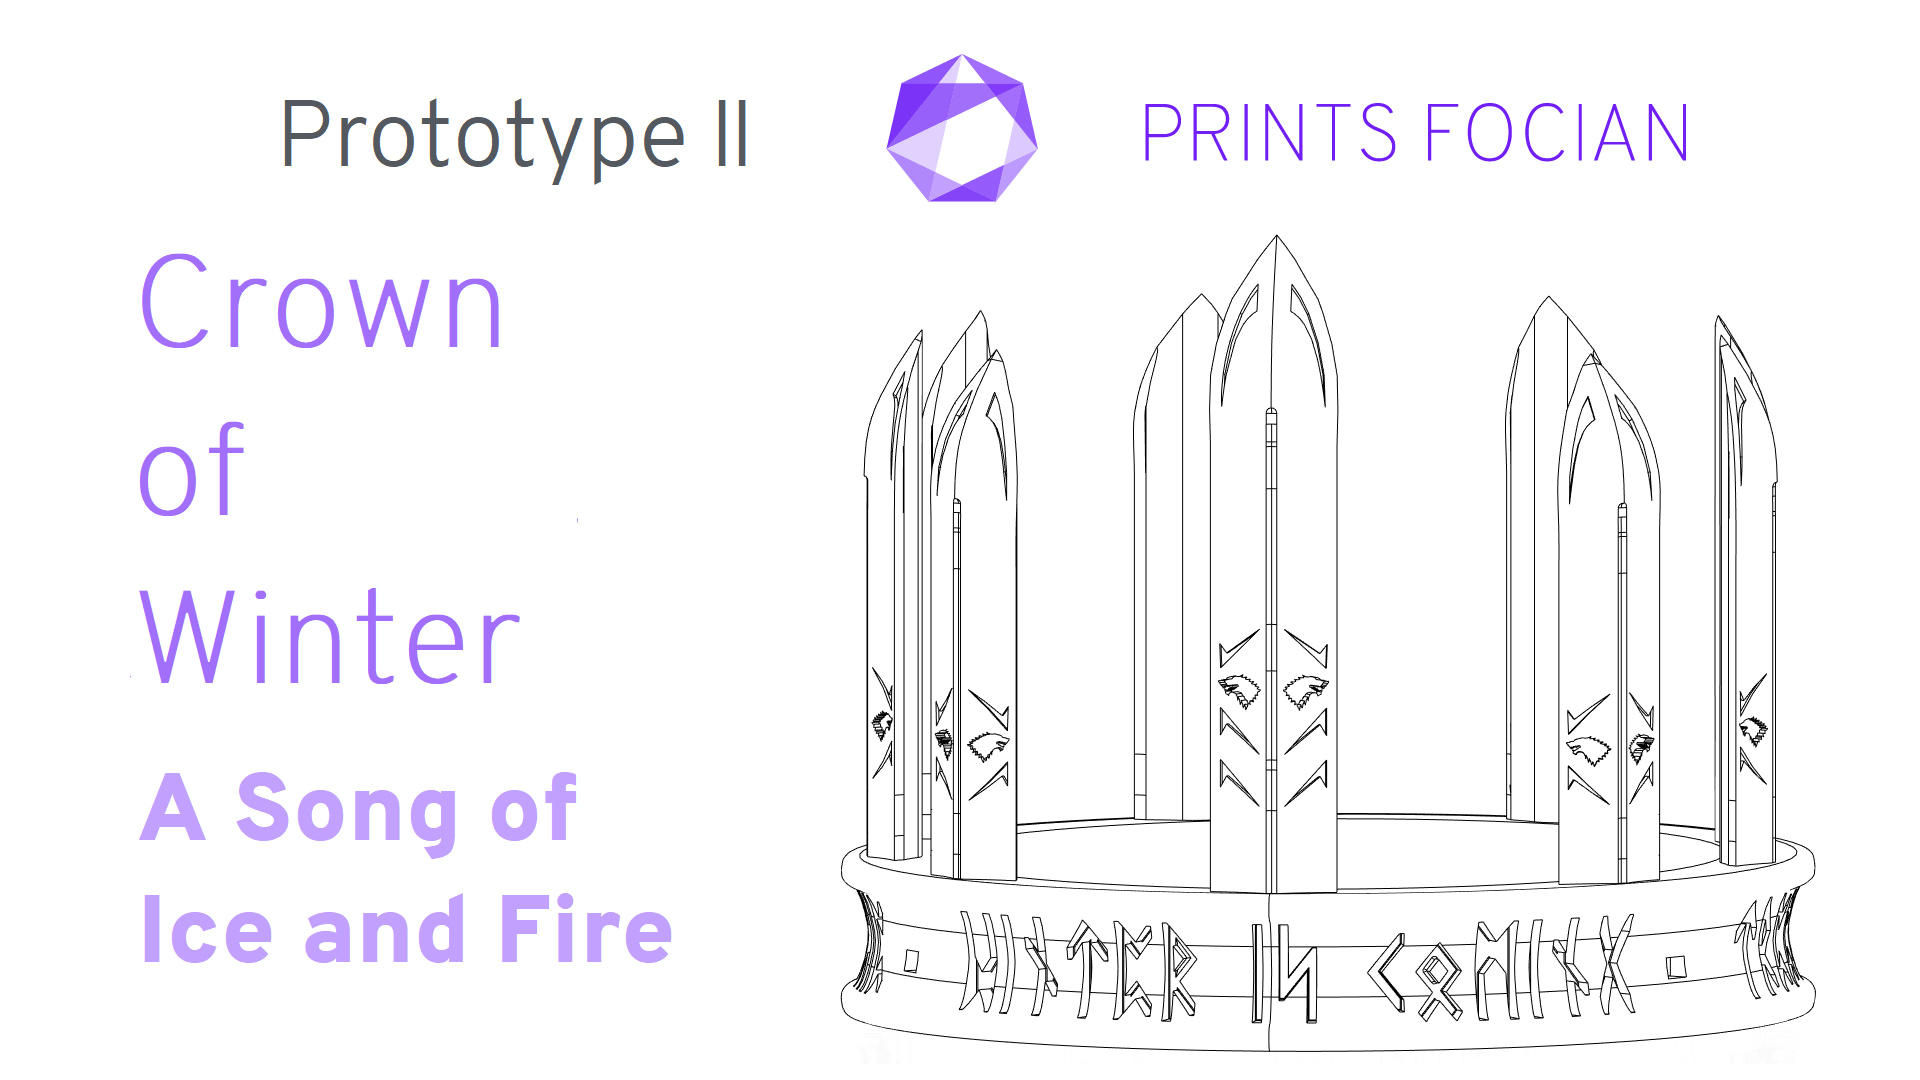 Wireframe image of the Crown of WInter on a white background. Prints Focian Icon top and central. Text: Purple Prints Focian, Crown of Winter, A Song of Ice and Fire and dark grey Prototype I